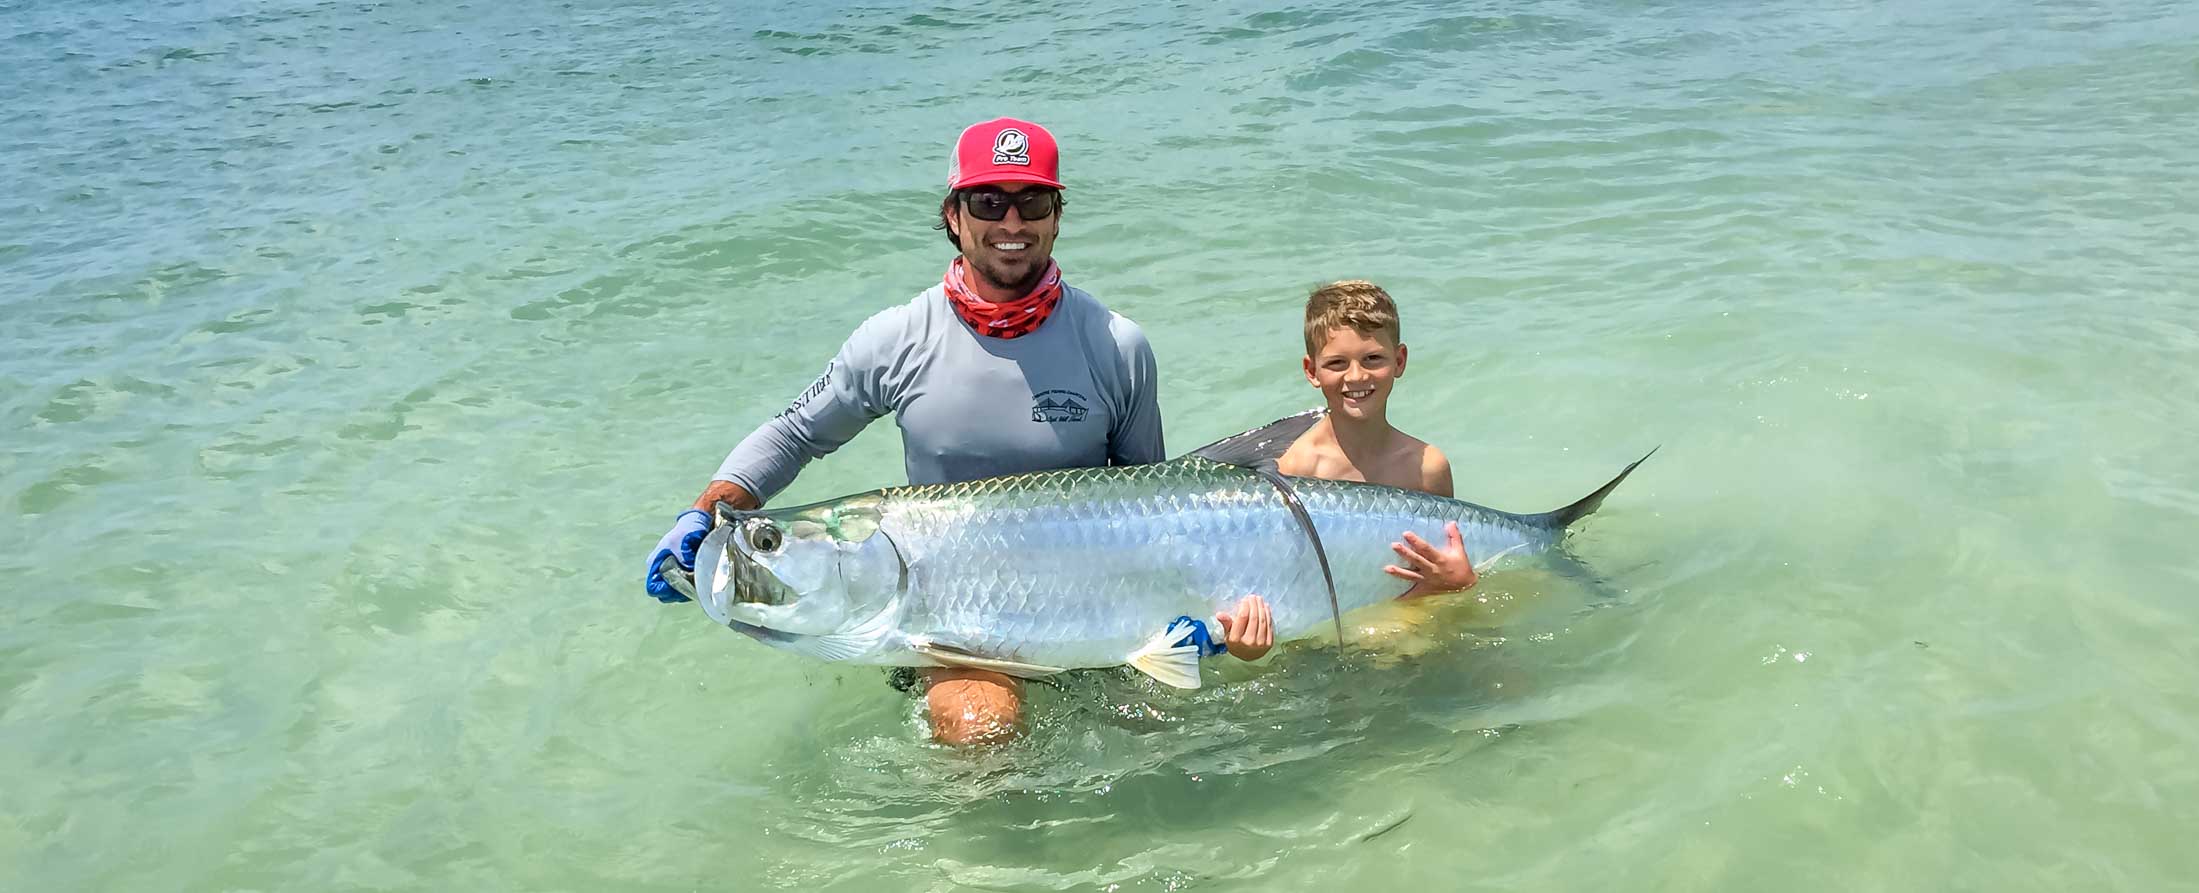 Tampa Fishing Charters Tampa, FL Offering full and half day Tampa